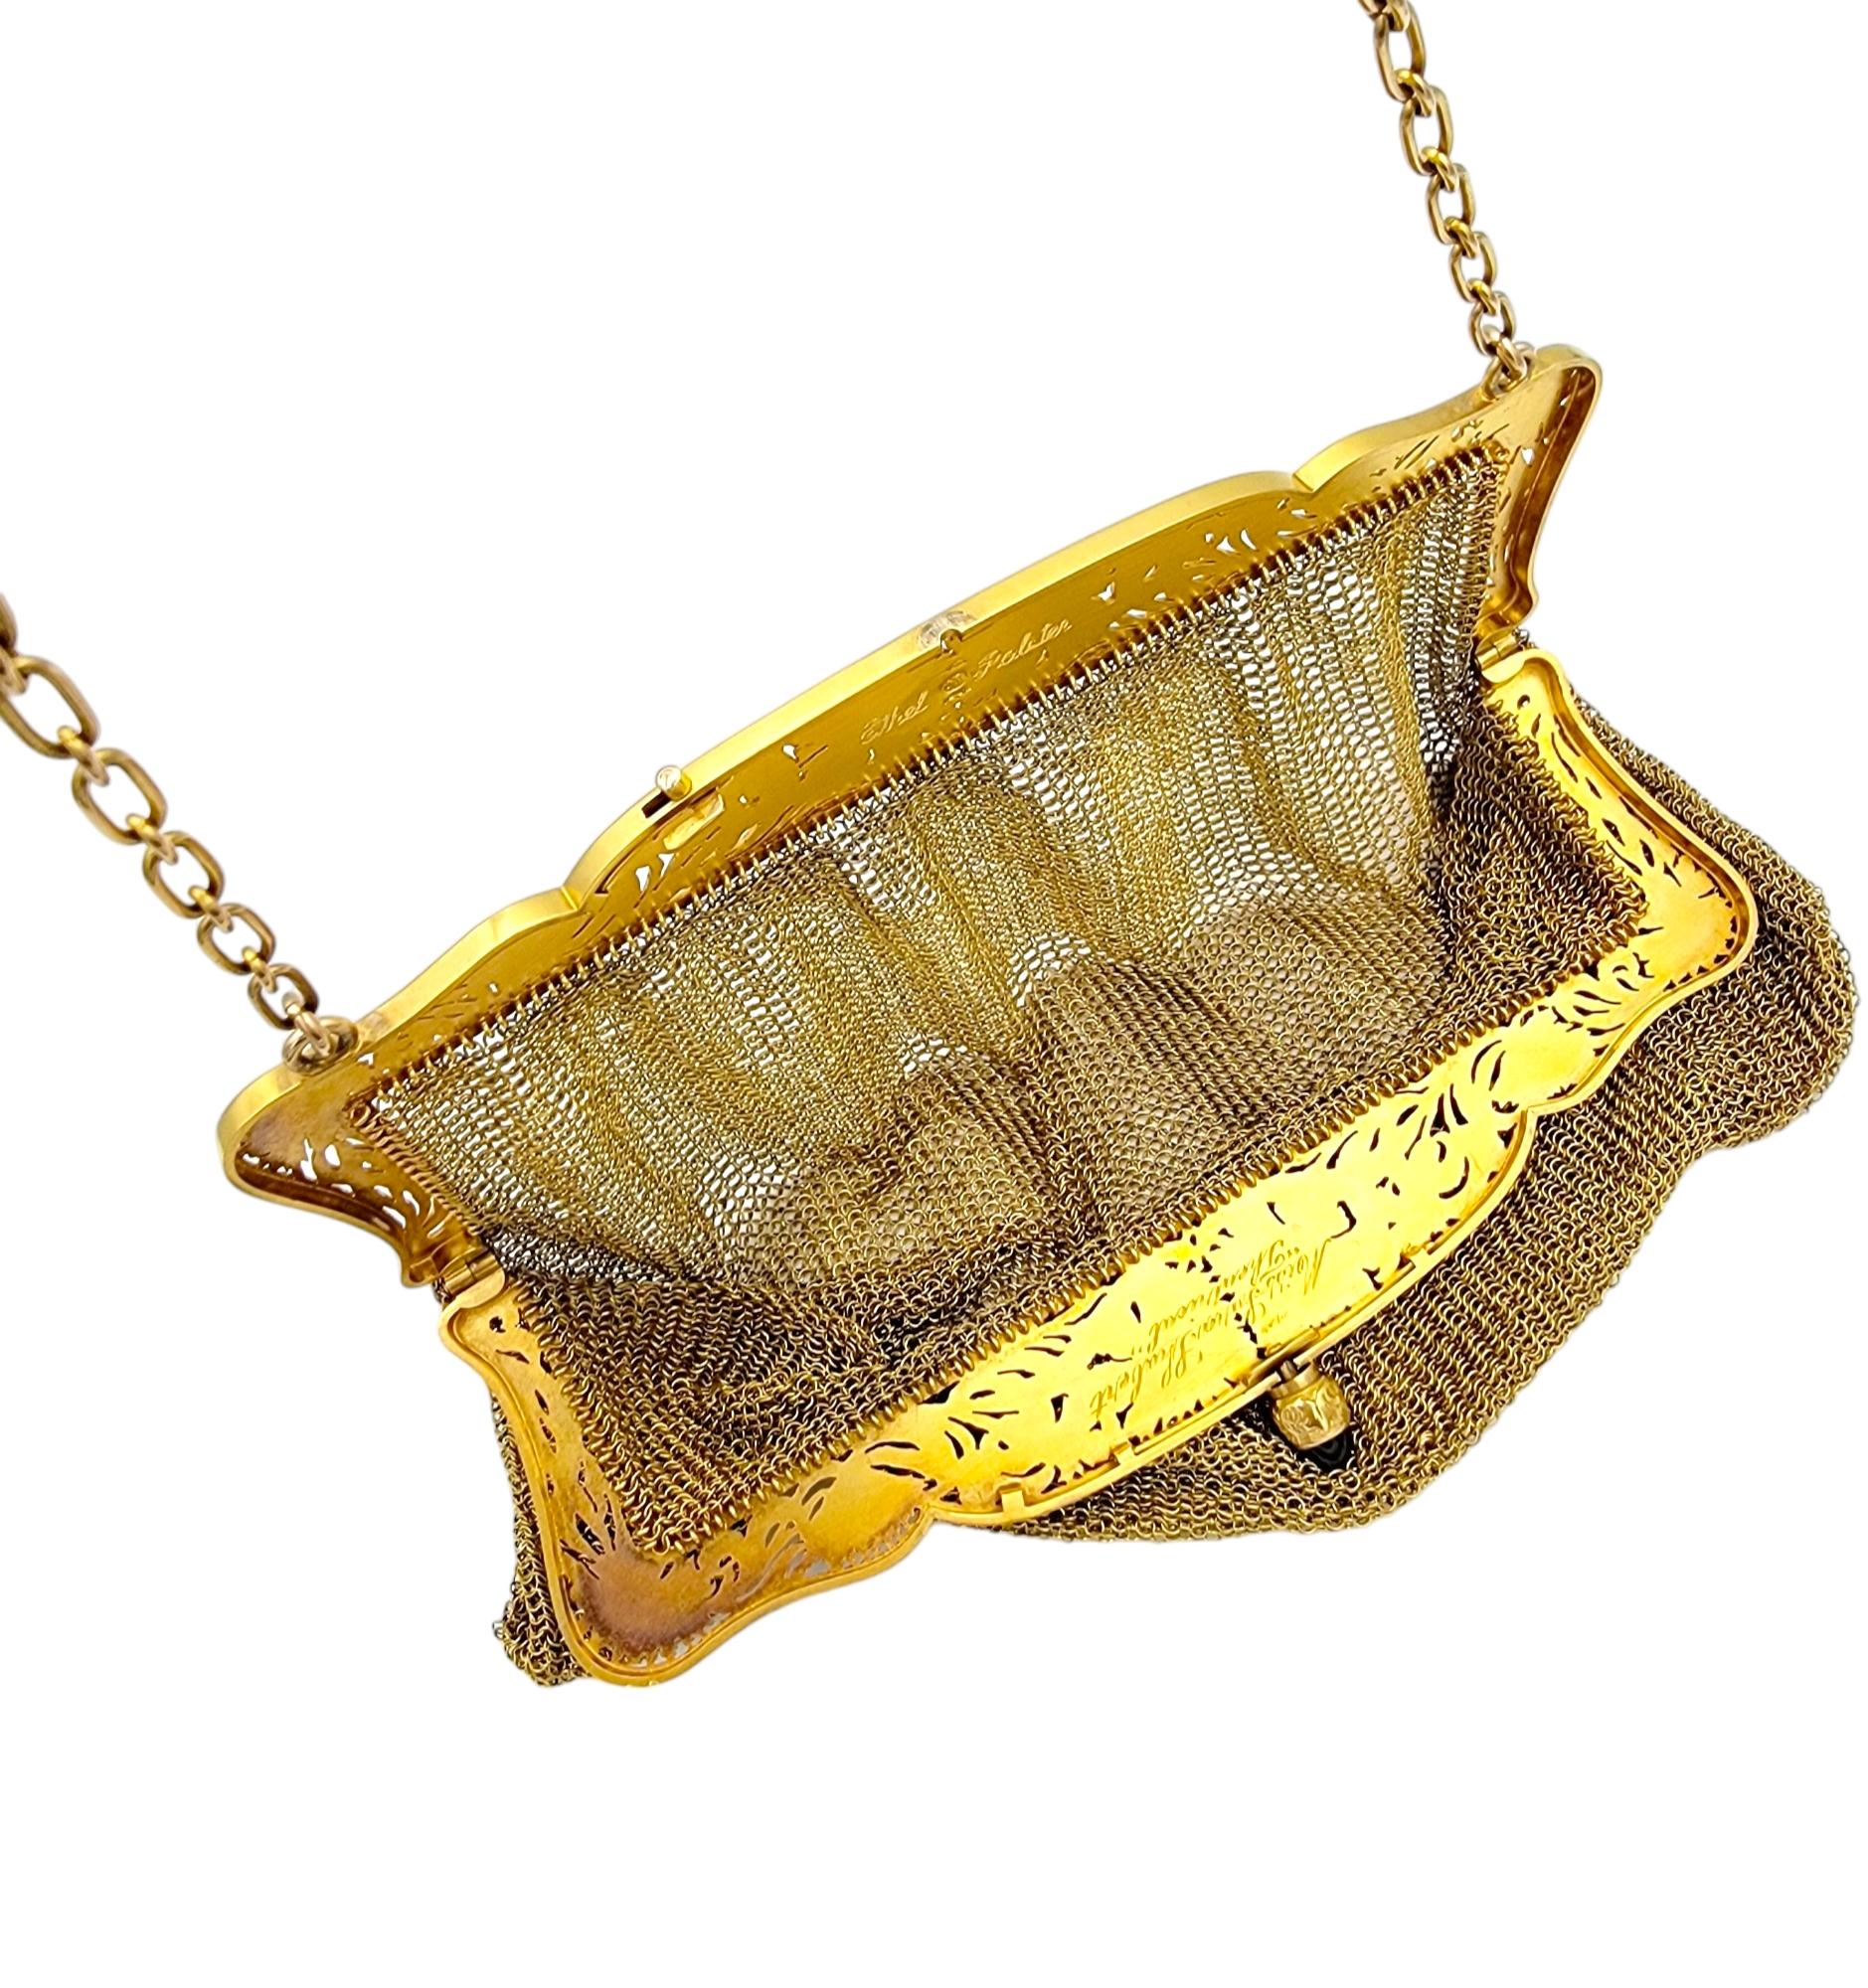 Vintage Art Deco 14 Karat Gold Mesh Purse with Chain and Sapphire Cabochon Clasp For Sale 1